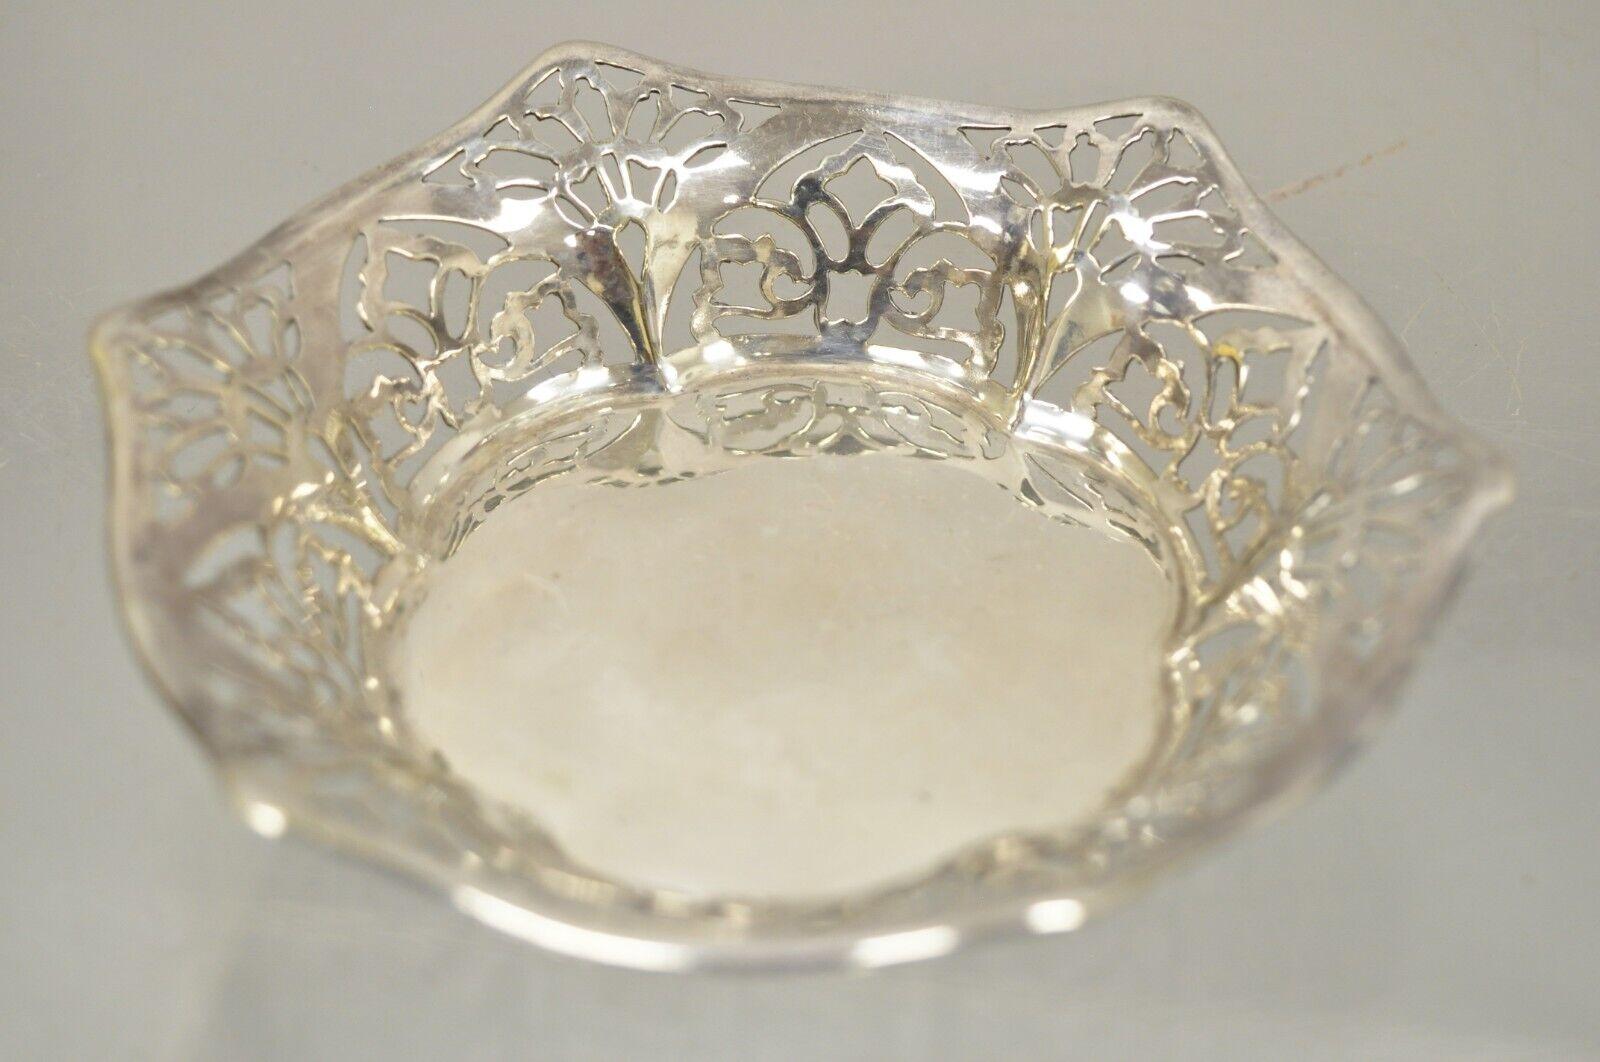 Vintage TBB England silver plate EPNS small floral pierced trinket dish bowl. Item features floral fretwork pierced decoration, nice small size, original stamp early to mid 20th century. Measurements: 1